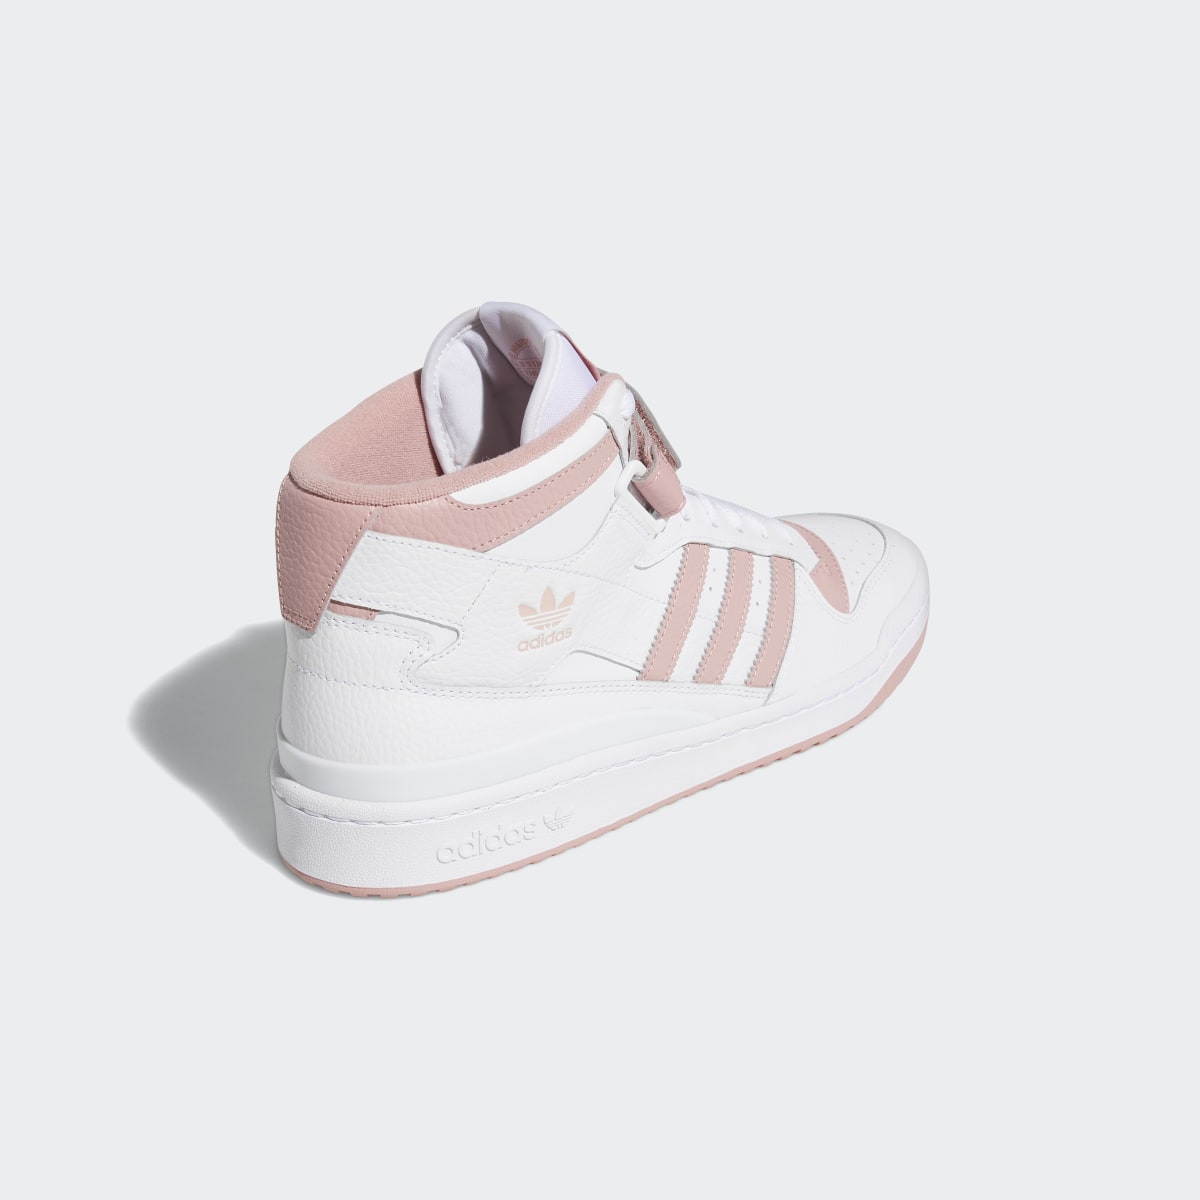 Adidas Forum Mid Shoes. 6